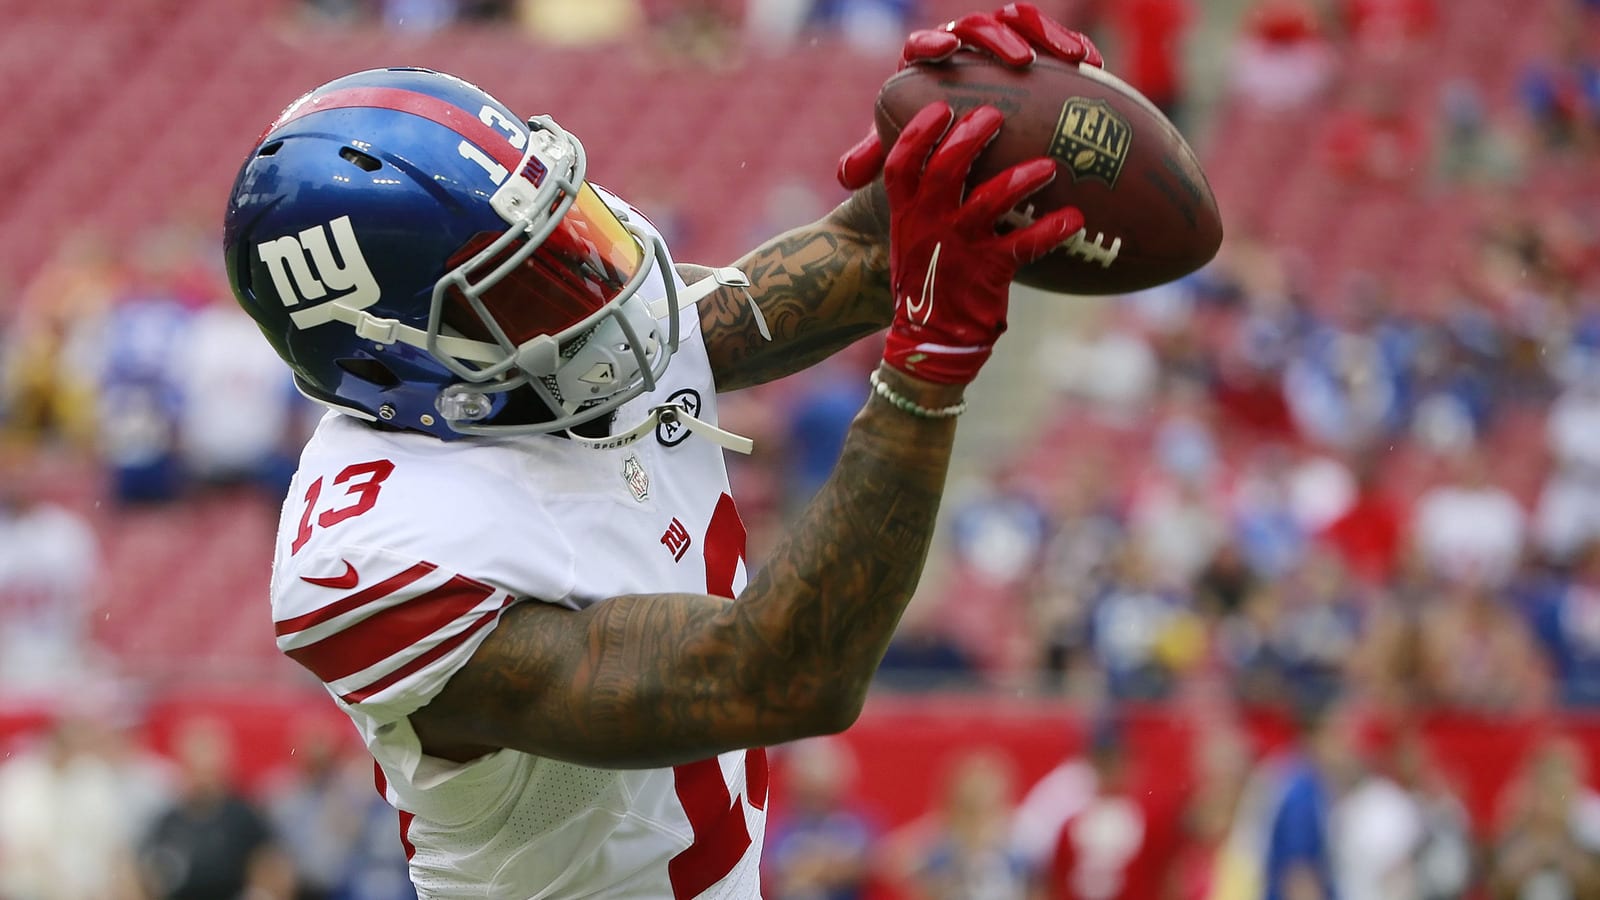 Odell Beckham Jr. and Hakeem Nicks broke the ice by measuring hand size